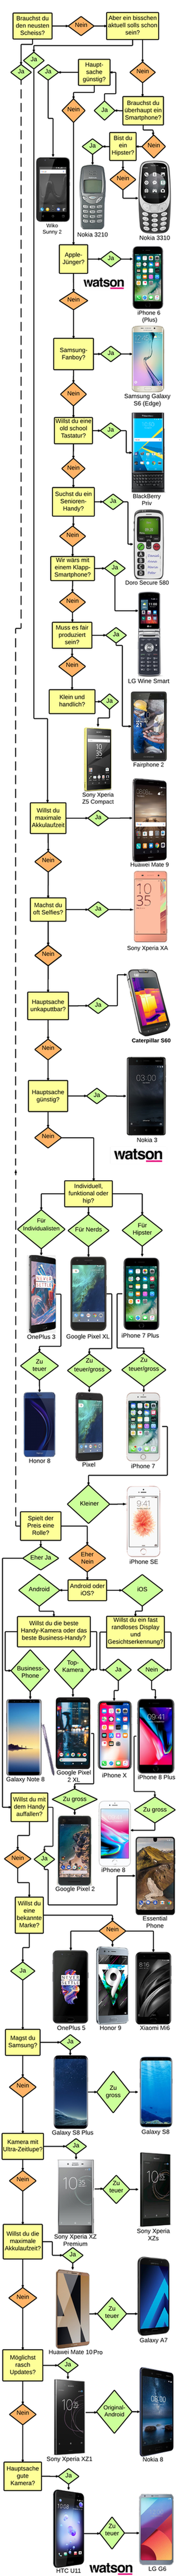 iPhone Android smartphone handy flussdiagramm